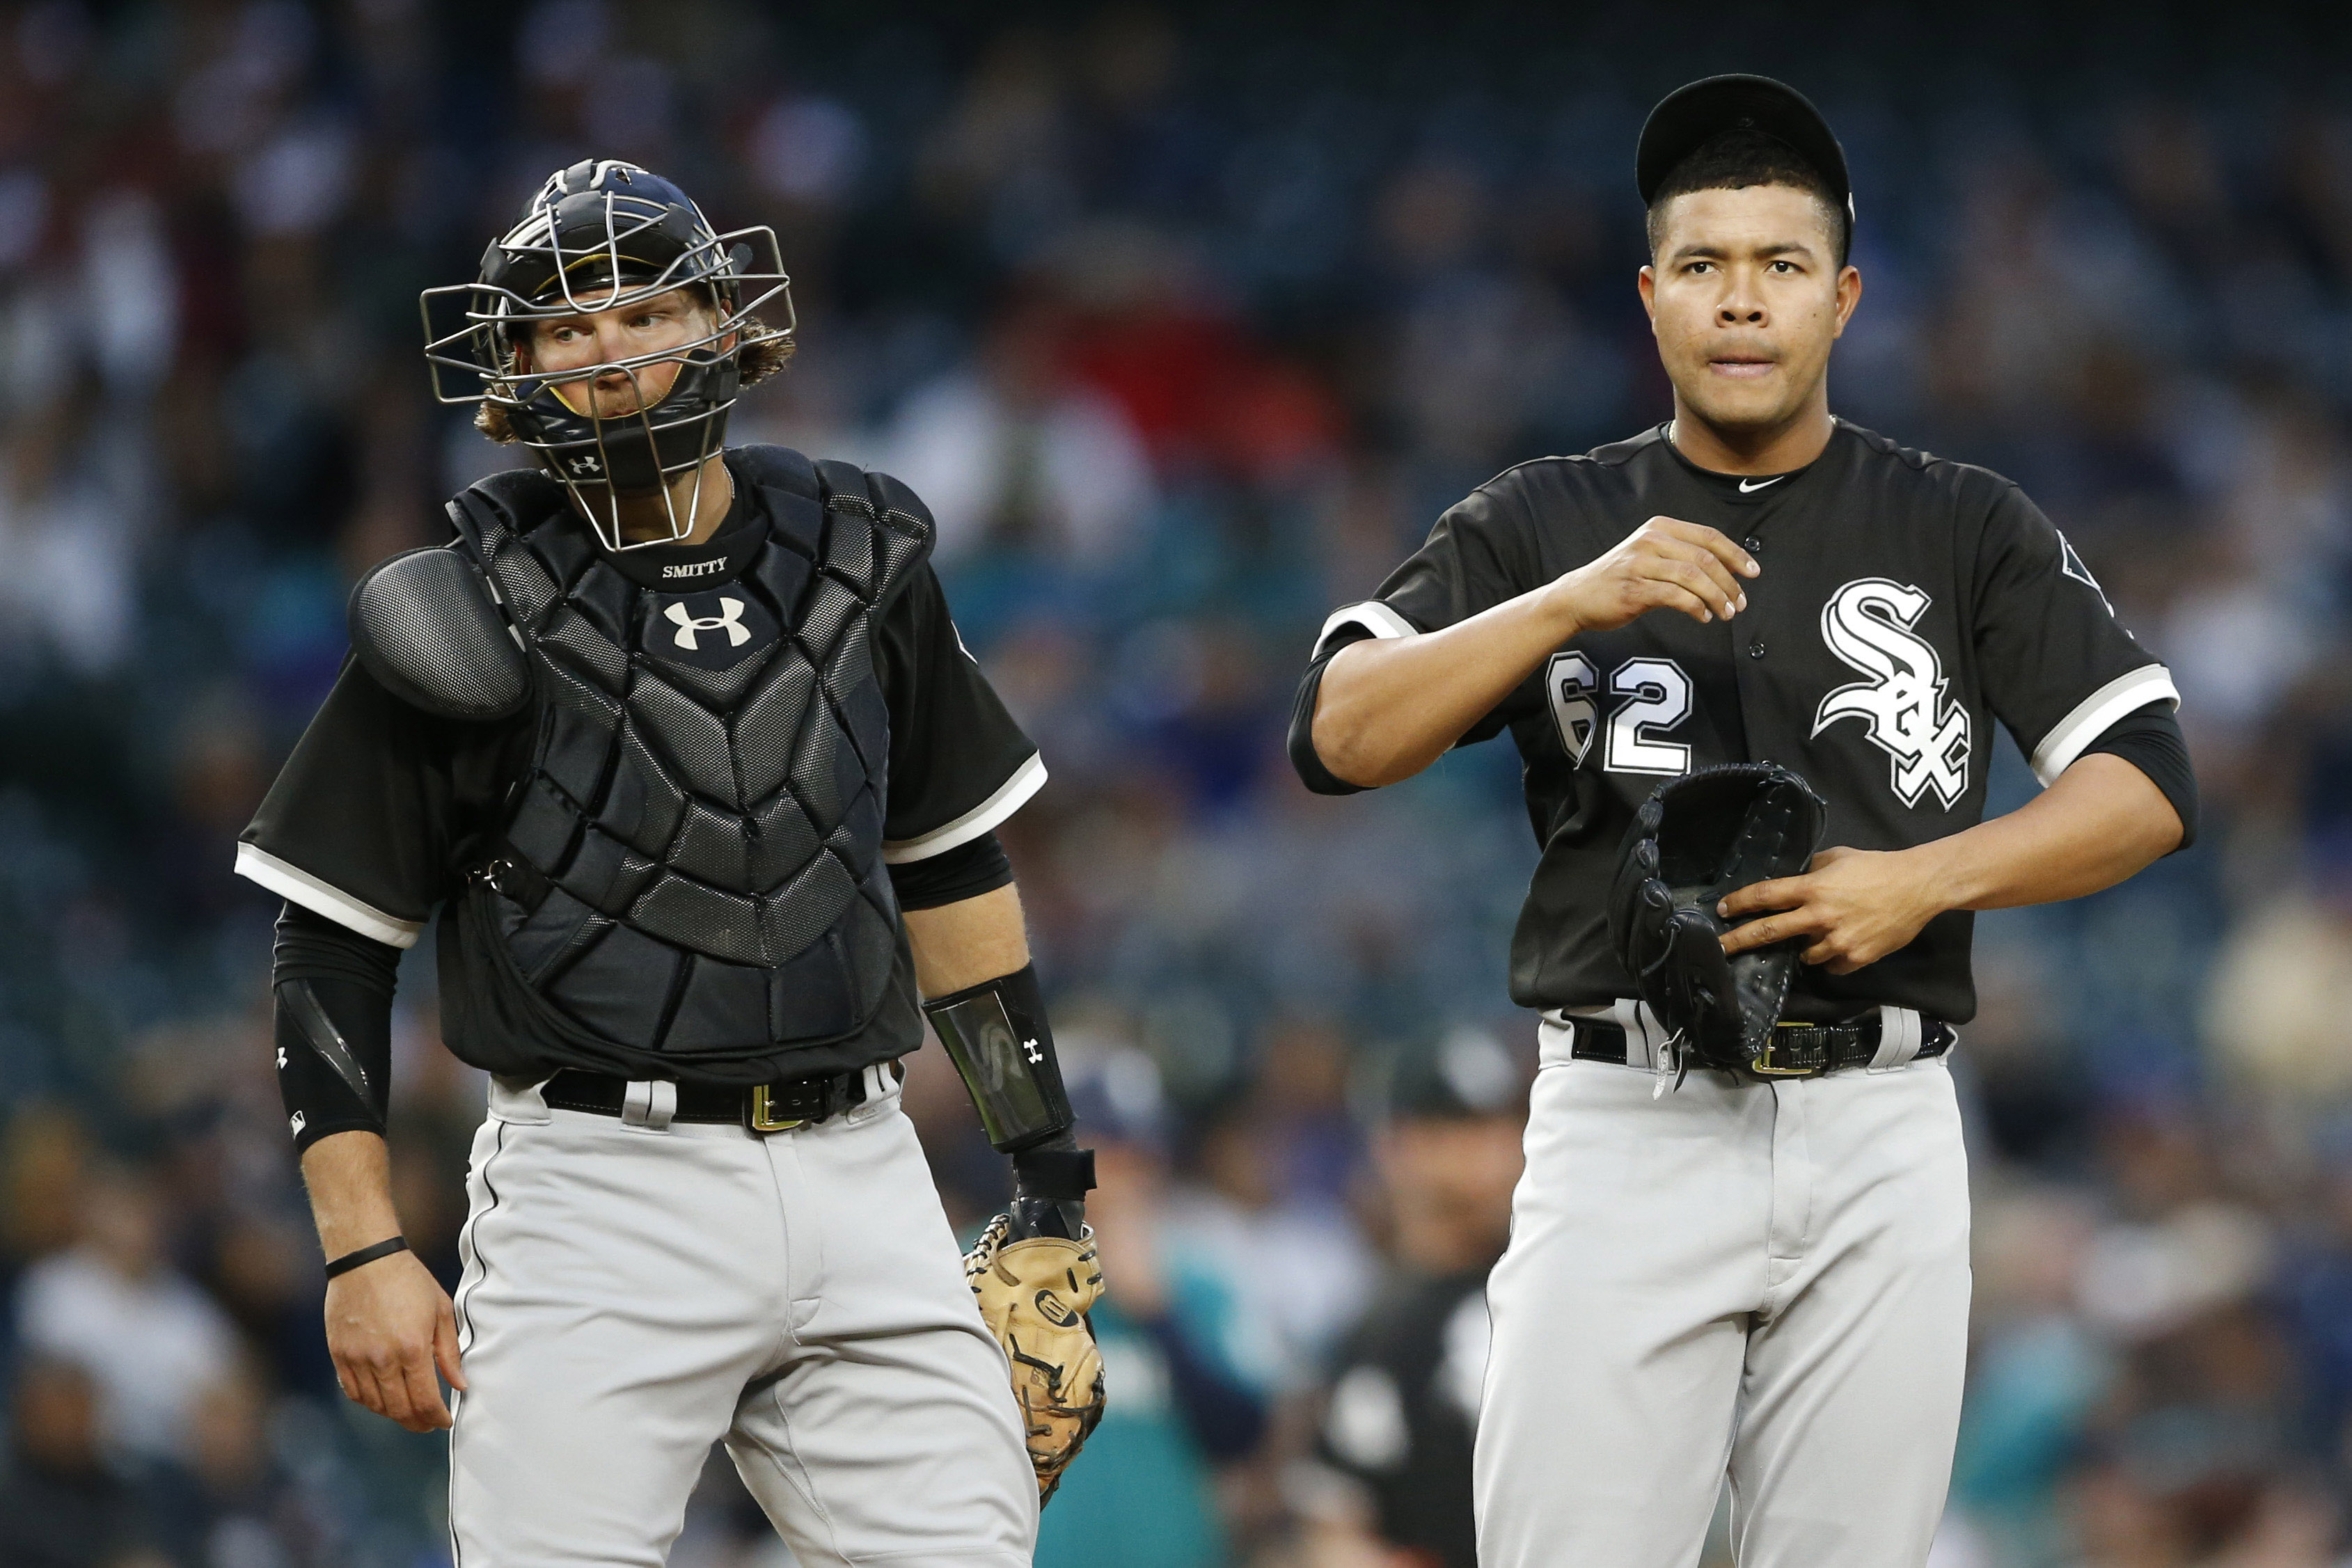 MLB: Chicago White Sox at Seattle Mariners